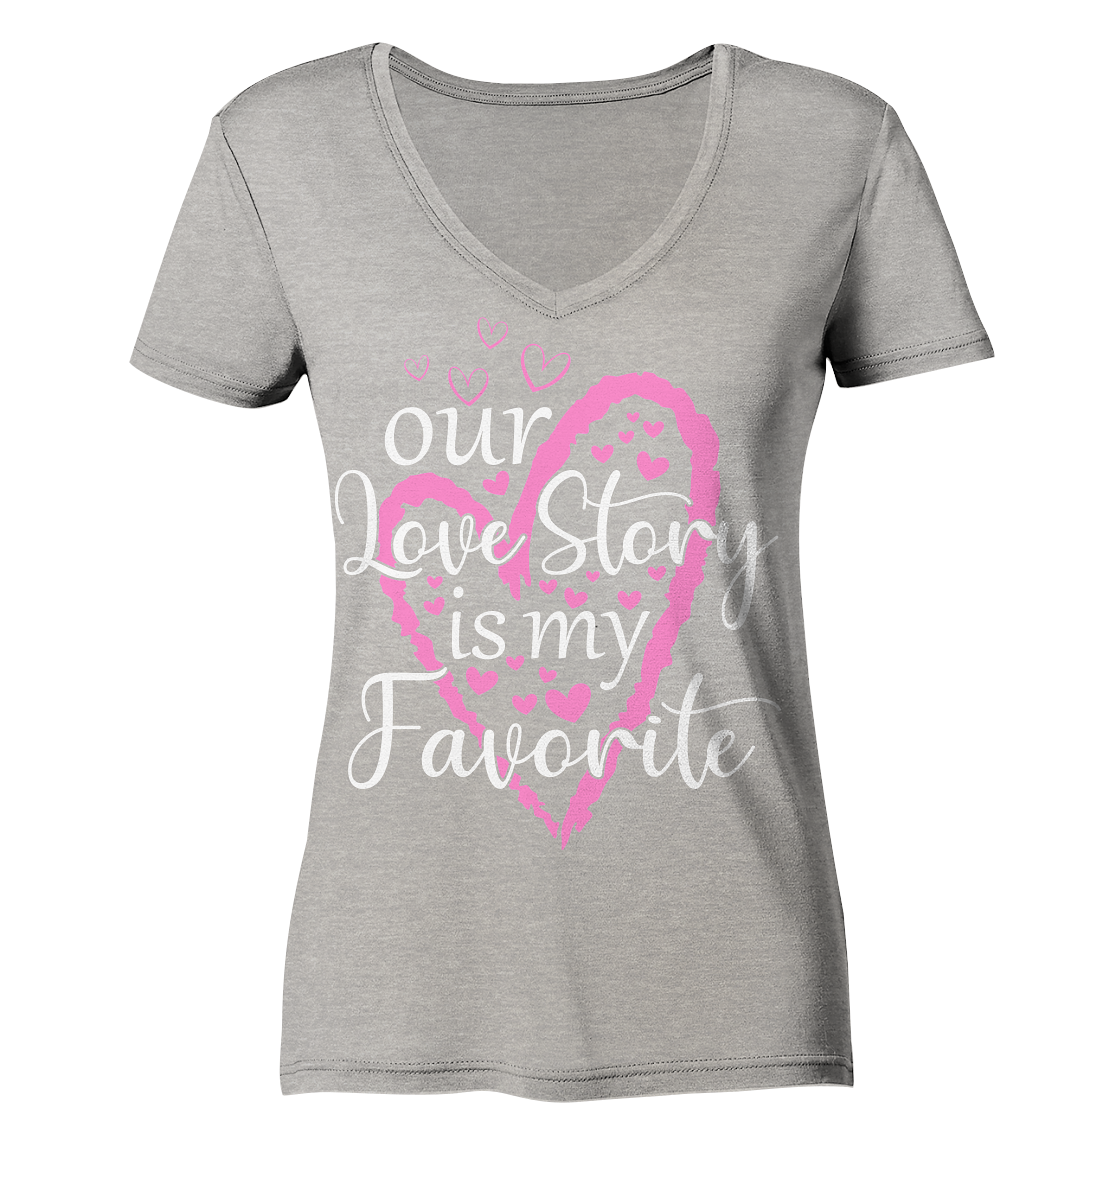 Our love story is my favourite - Ladies Organic V-Neck Shirt